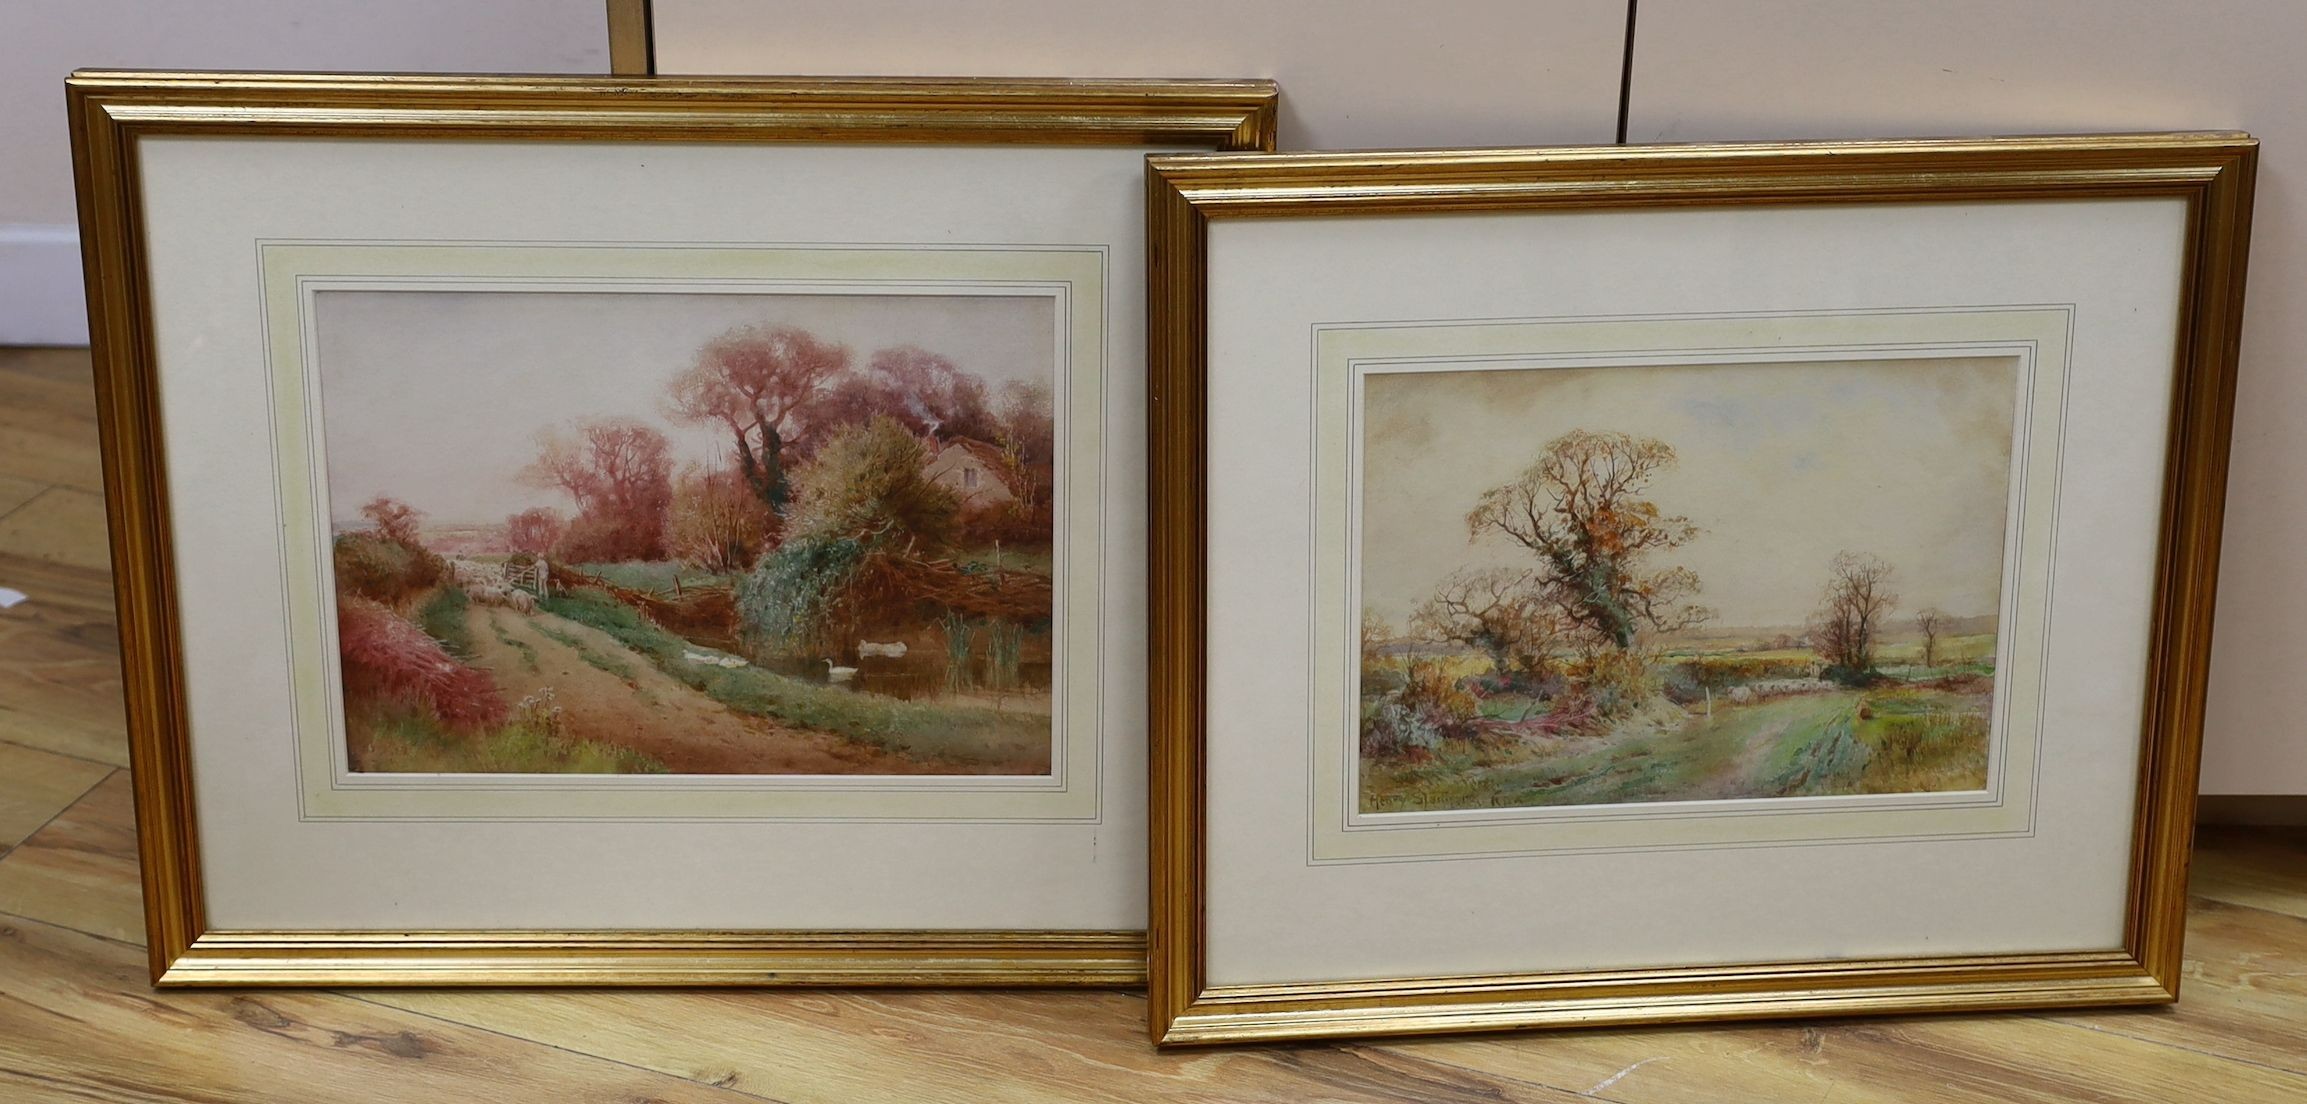 Henry John Sylvester Stannard (19870-1951), two watercolours, 'Changing Pastures' and 'Going to Market', initialled, 27 x 38cm and 24 x 34cm